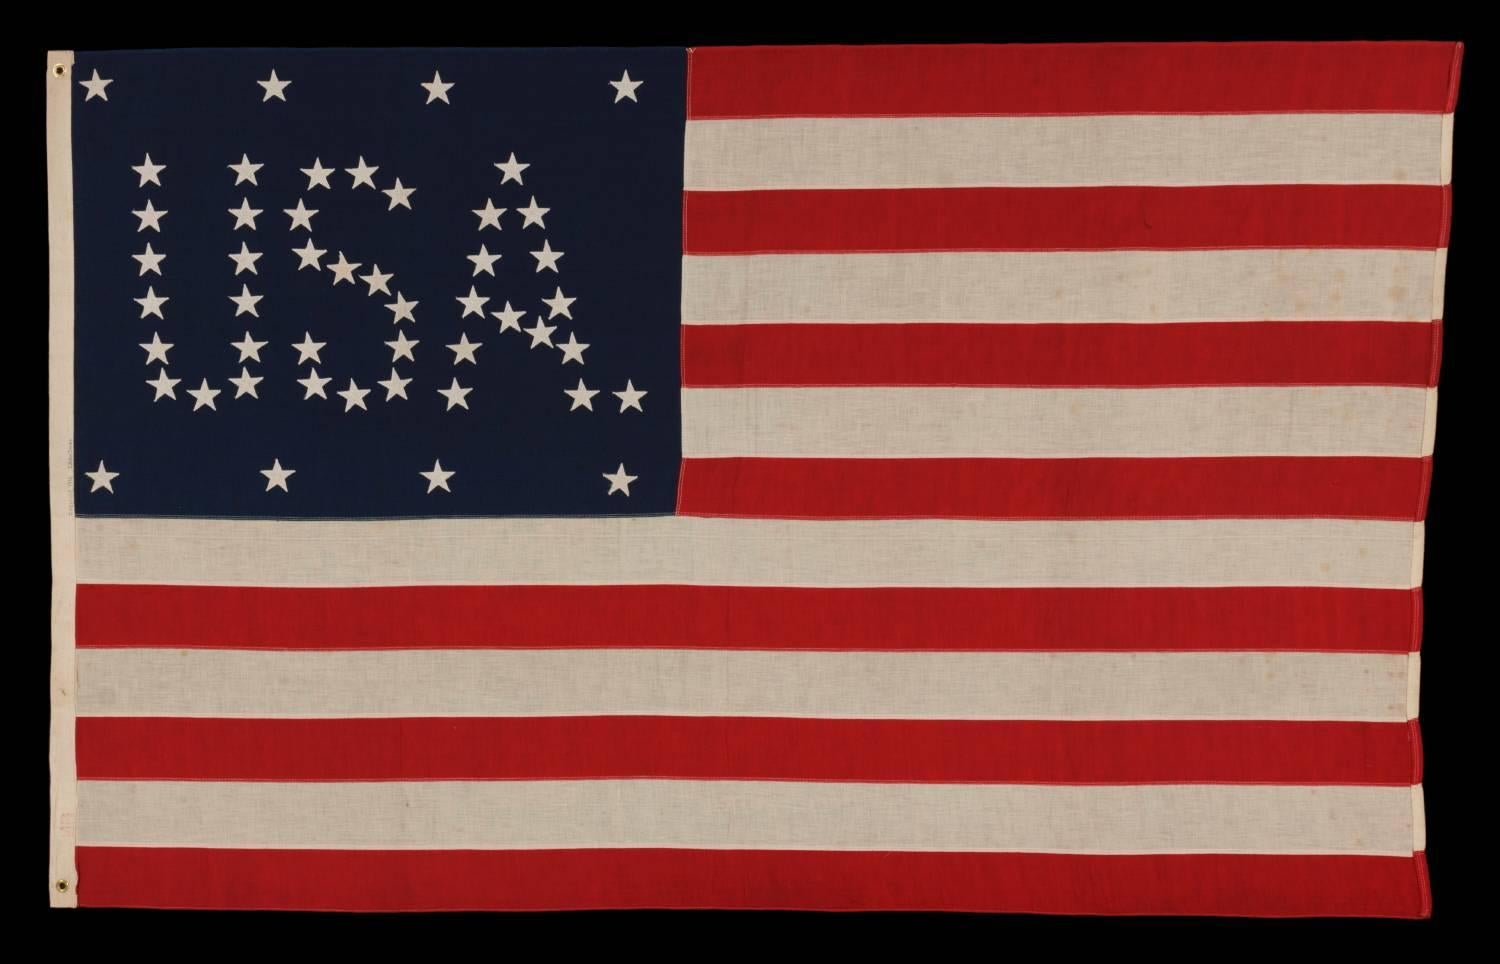 48 STARS CONFIGURED INTO THE LETTERS “U.S.A.”, COPYRIGHTED IN 1916 BY C.A. HARTMAN, ONE OF ONLY FOUR KNOWN SURVIVING EXAMPLES AND ONE OF THE MOST INTERESTING DESIGNS KNOWN TO EXIST IN EARLY FLAGS: 

48 star American national flag; one of only four